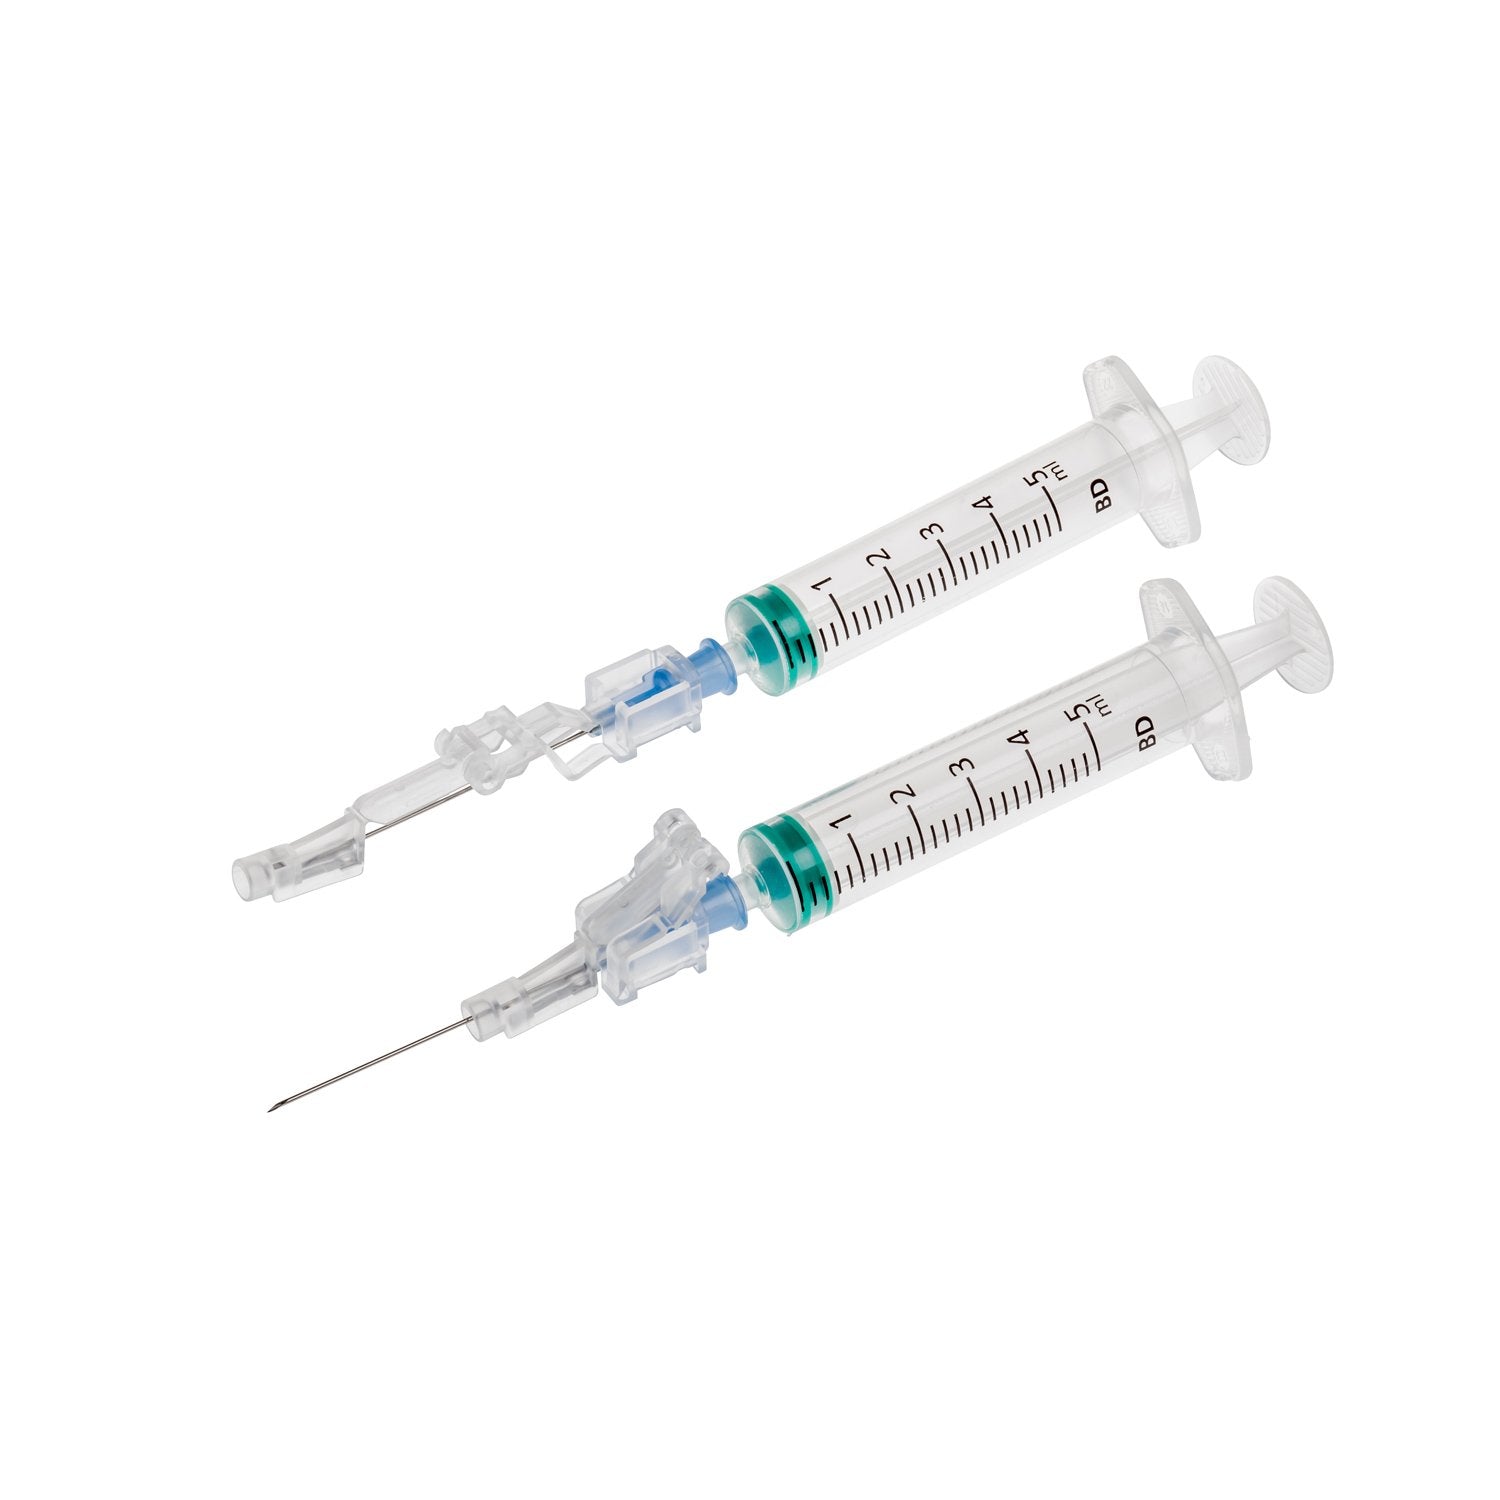 Bd Safety Glide Safety Injection Needles With Luer Attachment 